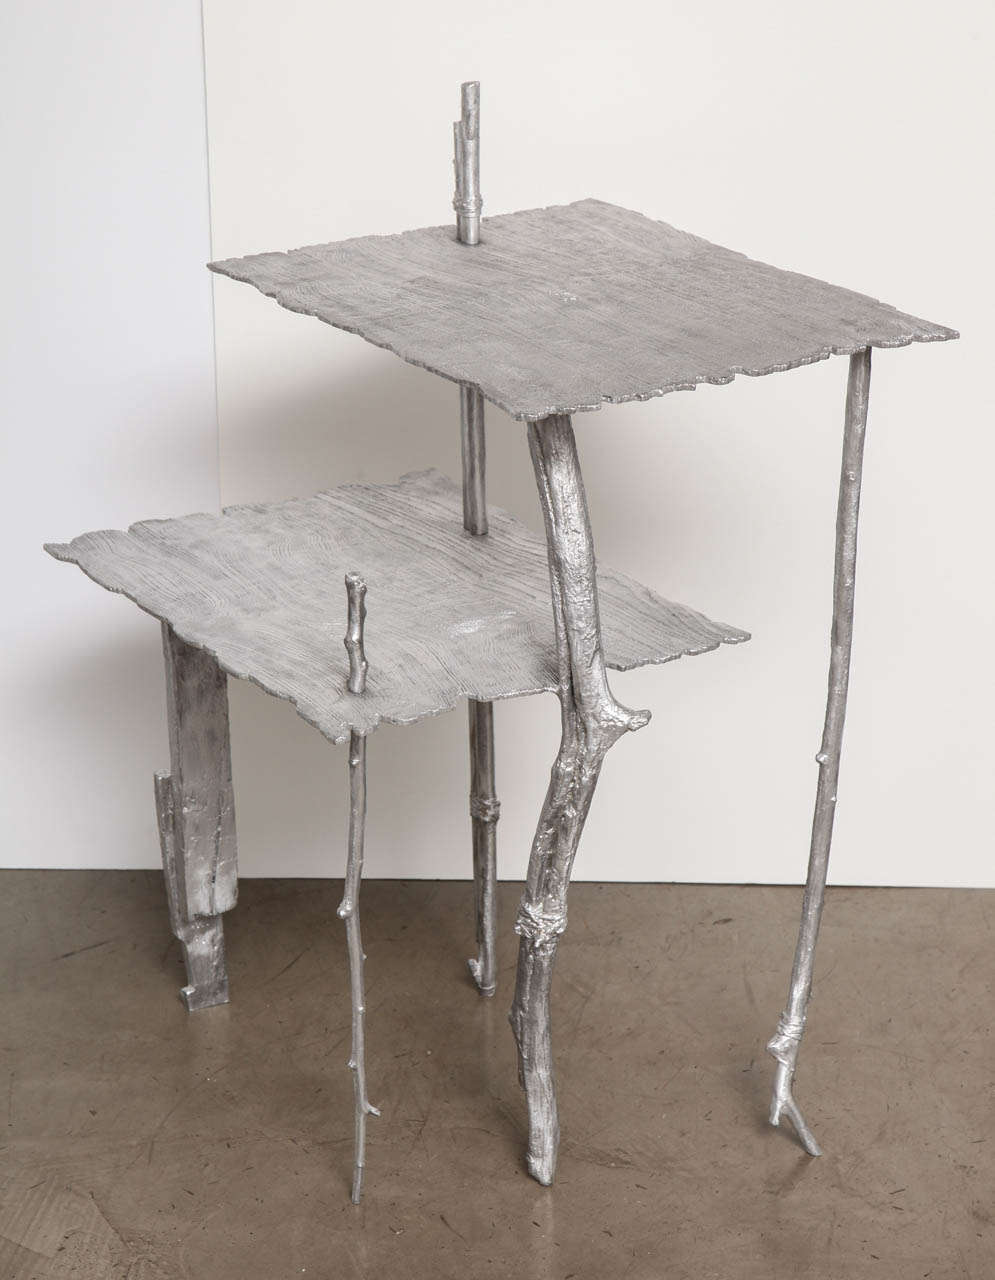 Two-levels cast aluminium table.

Limited edition of 24.
2014.

The life of Mattia Bonetti stands as a testament to the vast creative potential of ambiguity, uncertainty, Paradox and duality-and absolute refusal to be one thing when it is